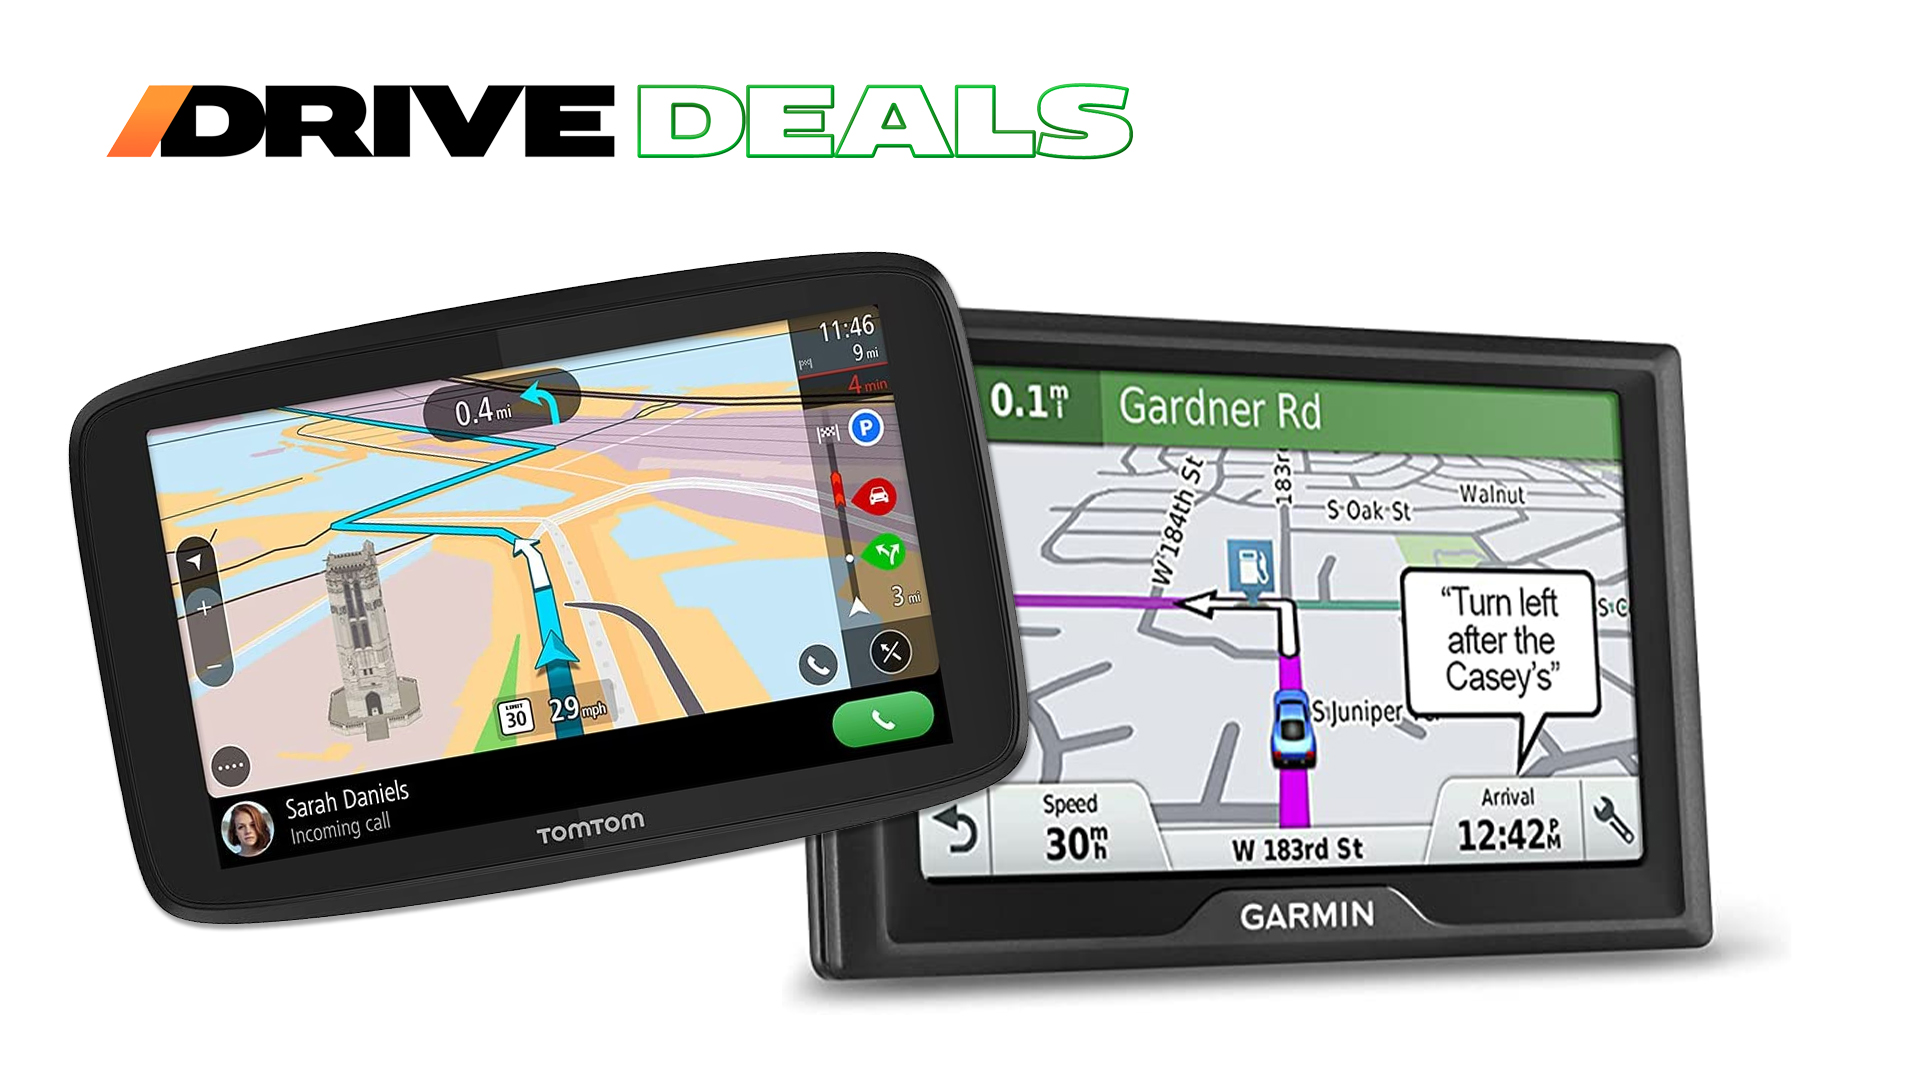 New Cars, GPS Added and much more